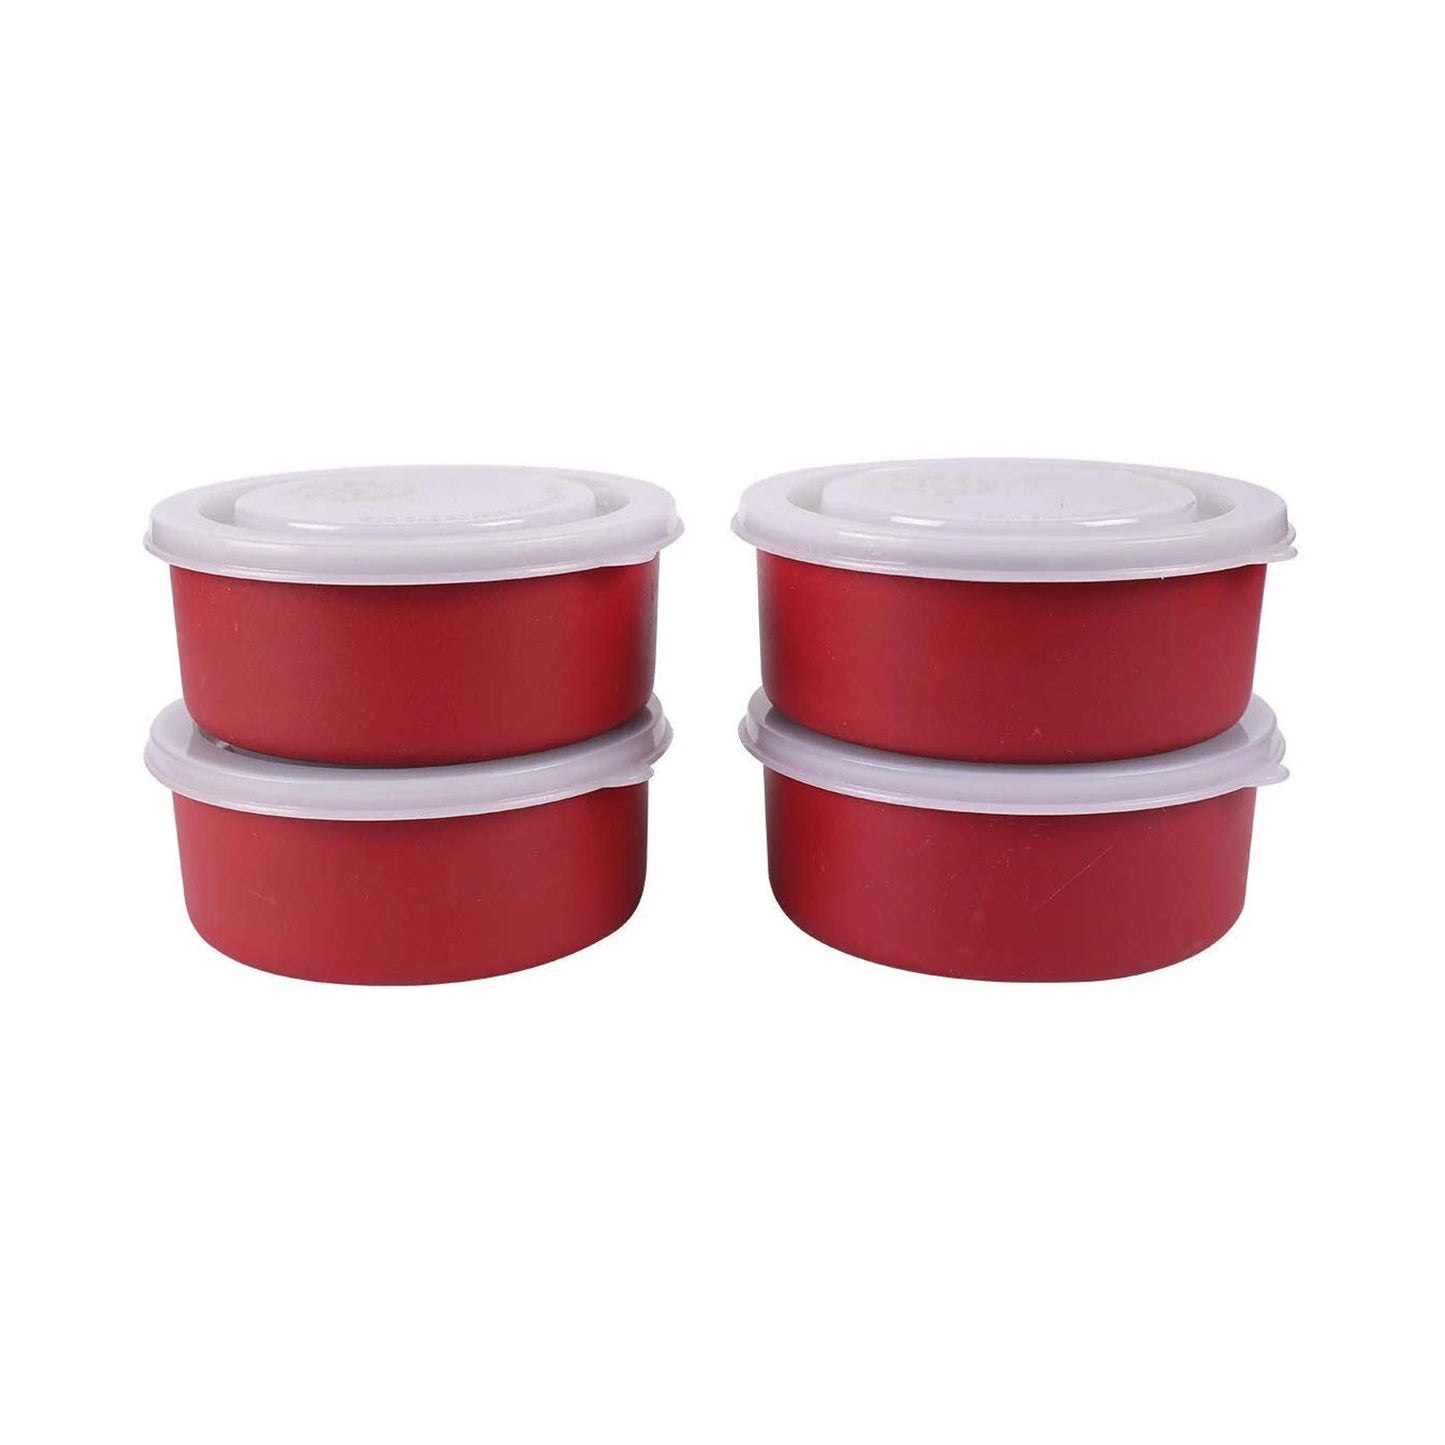 SWHF Microwave Safe Stainless Steel Tiffin/Lunch Box Set,Red (Pack of 4)